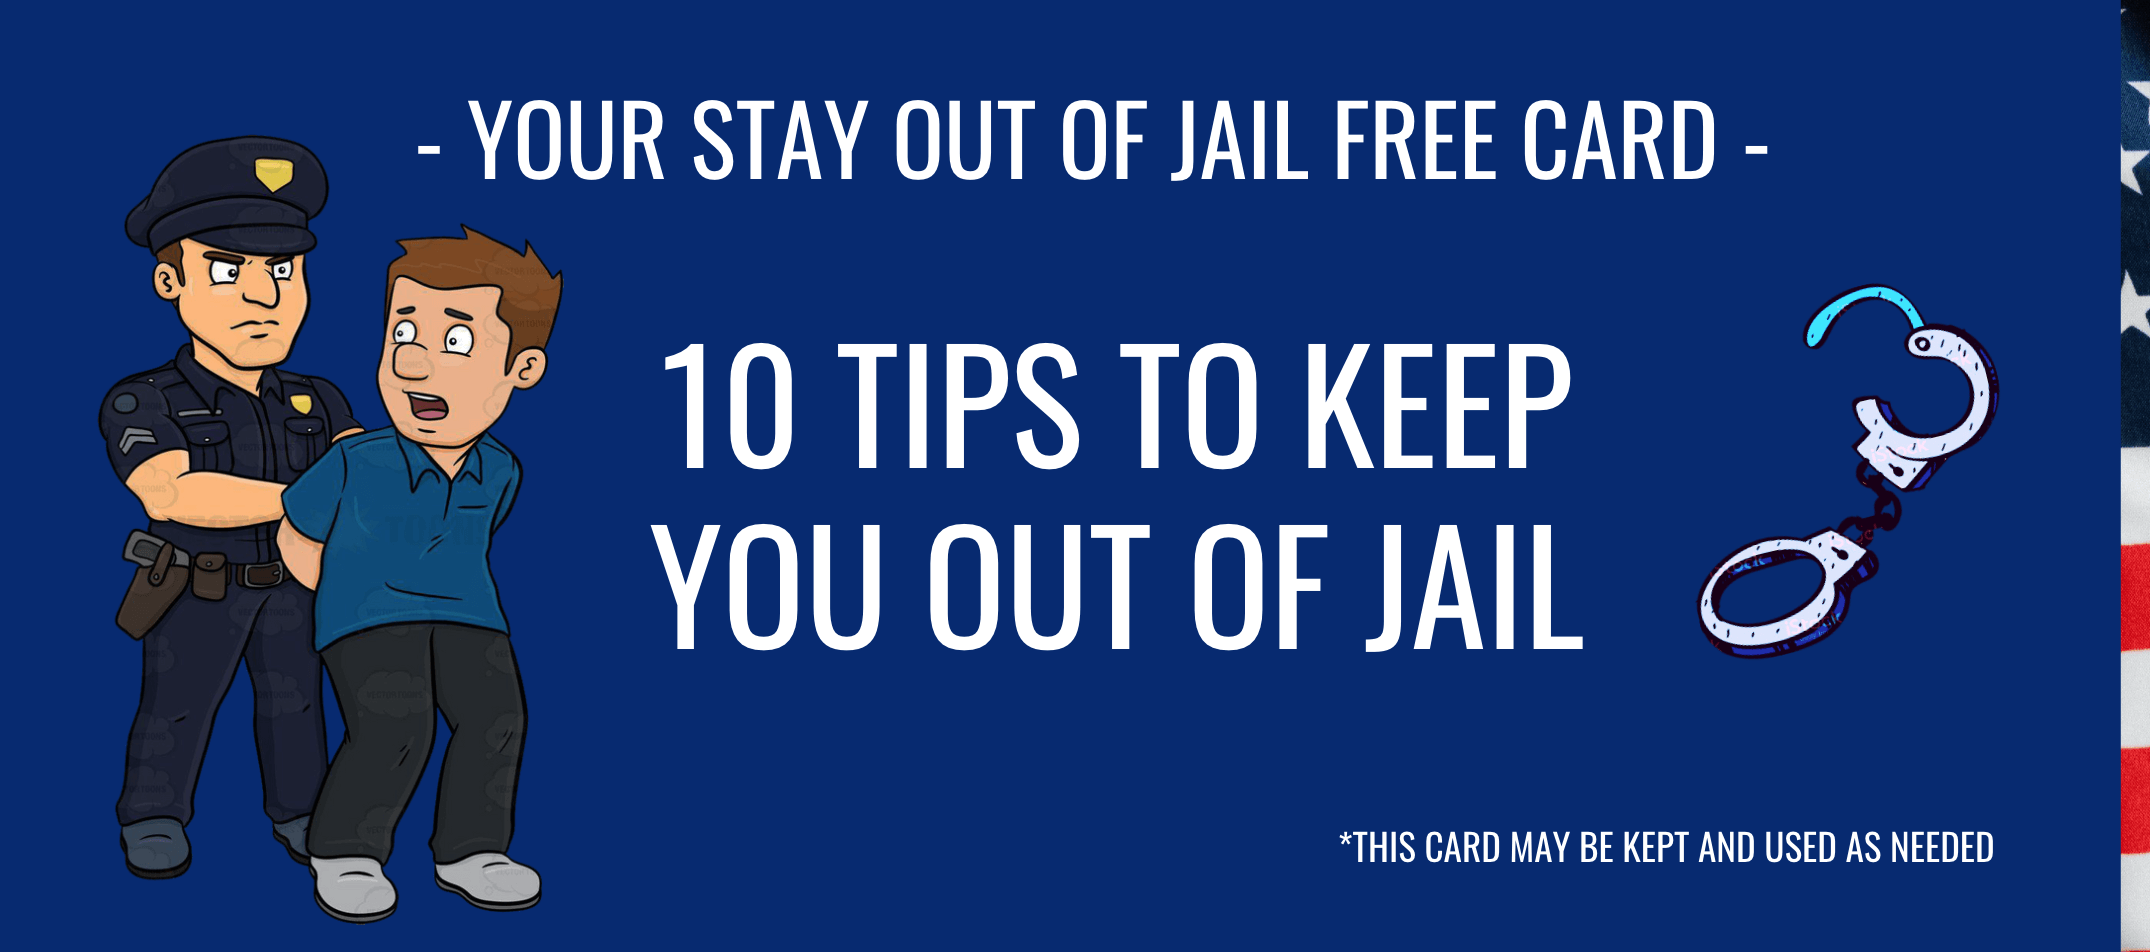 Stay out of jail free card